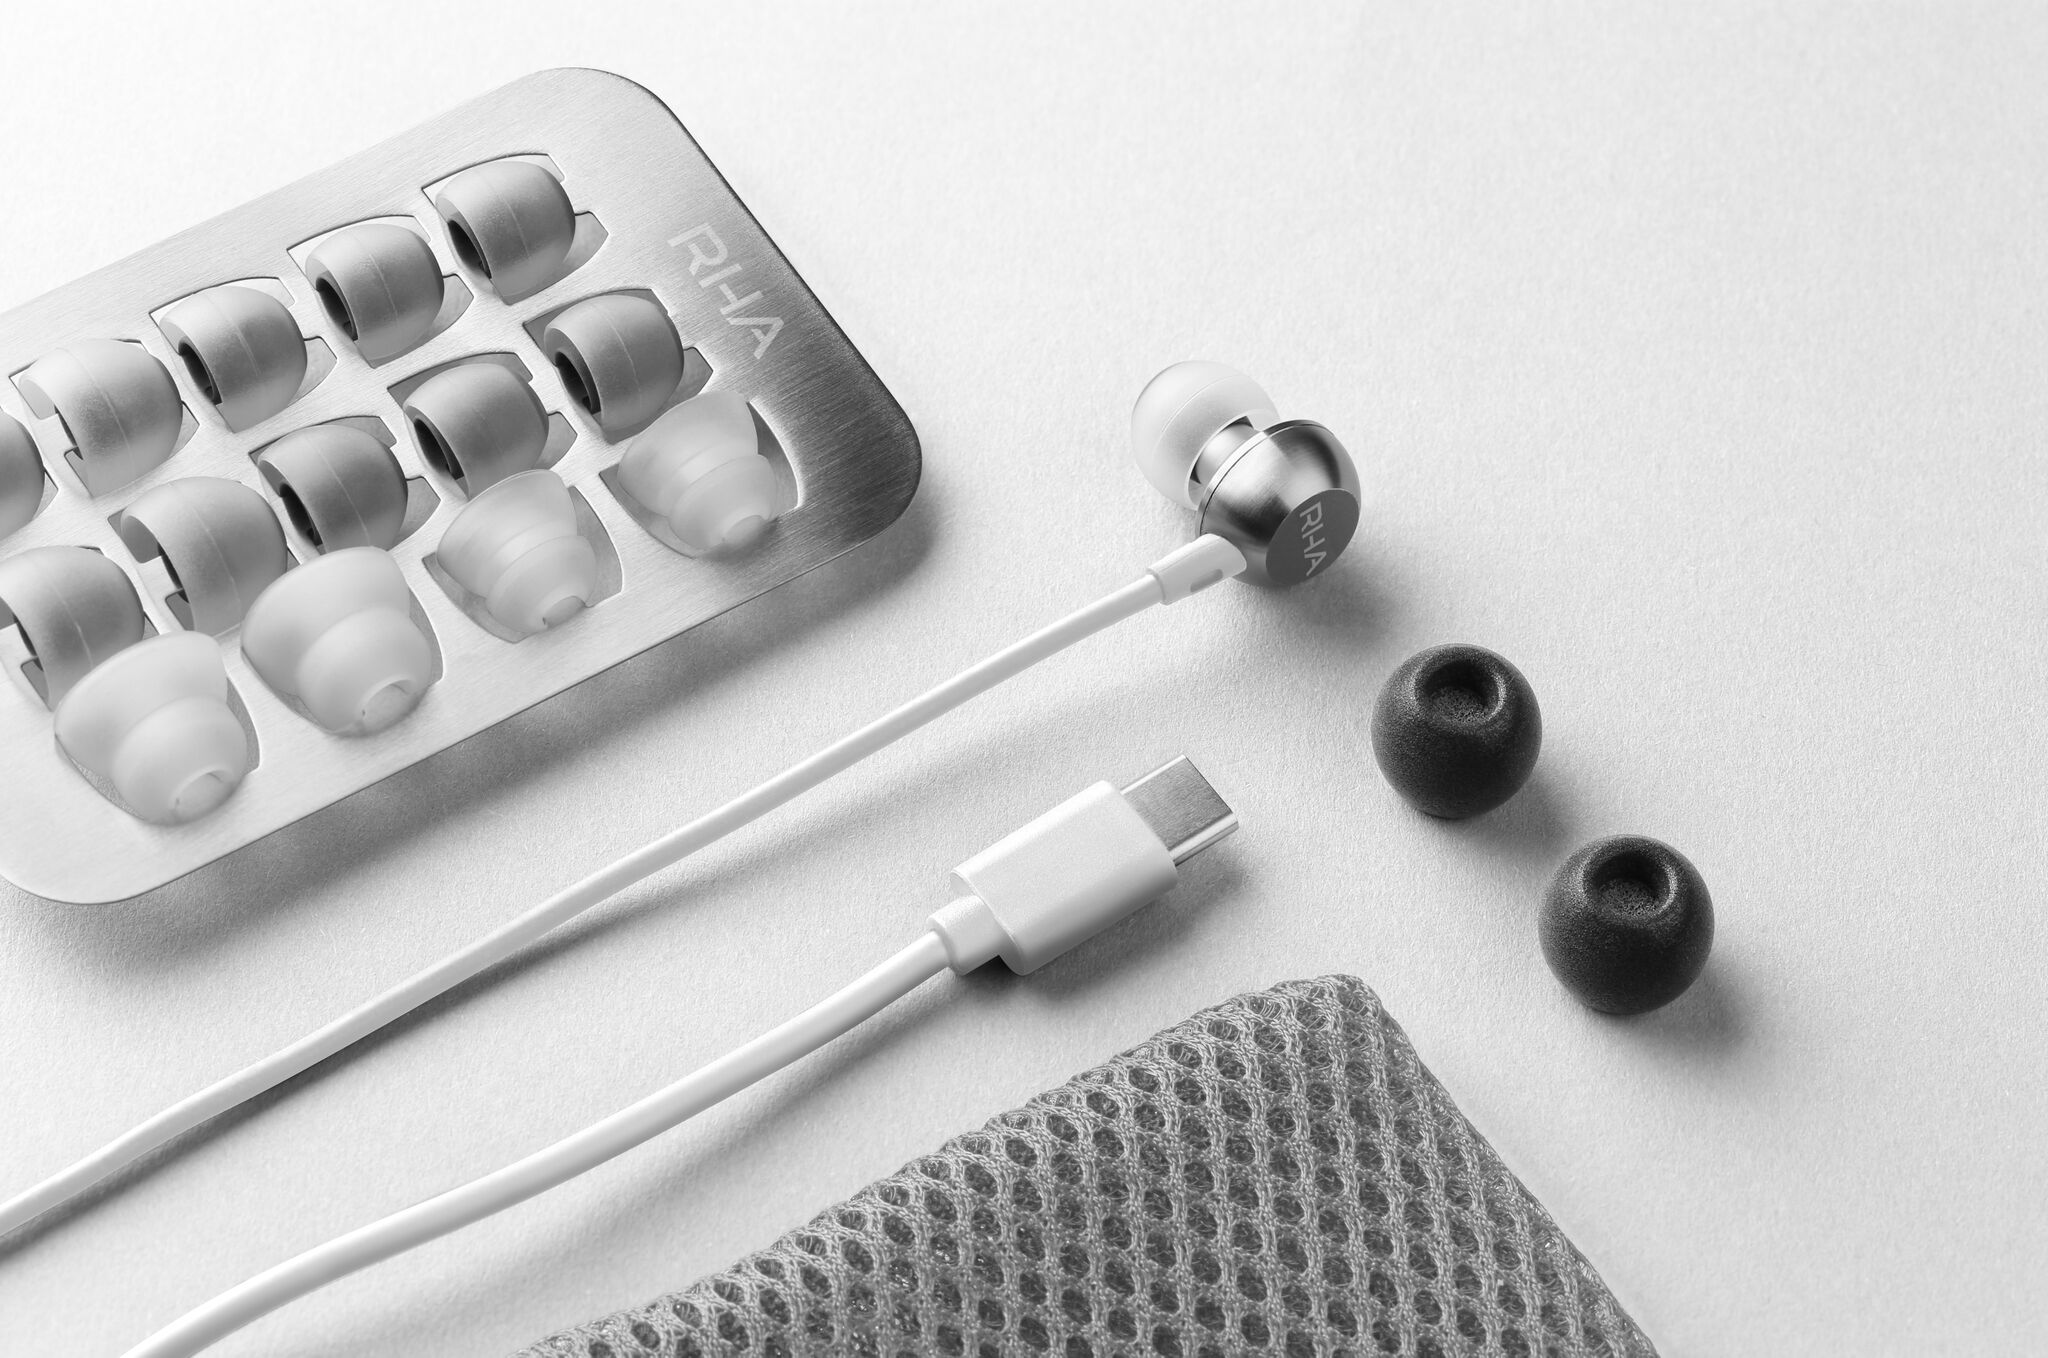 RHA MA650 Wireless in white laid out on a white surface with the accessories shown (9 pairs of ear tips, earbuds, USB-C charging cable, and a small mesh carrying pouch -- all in white)